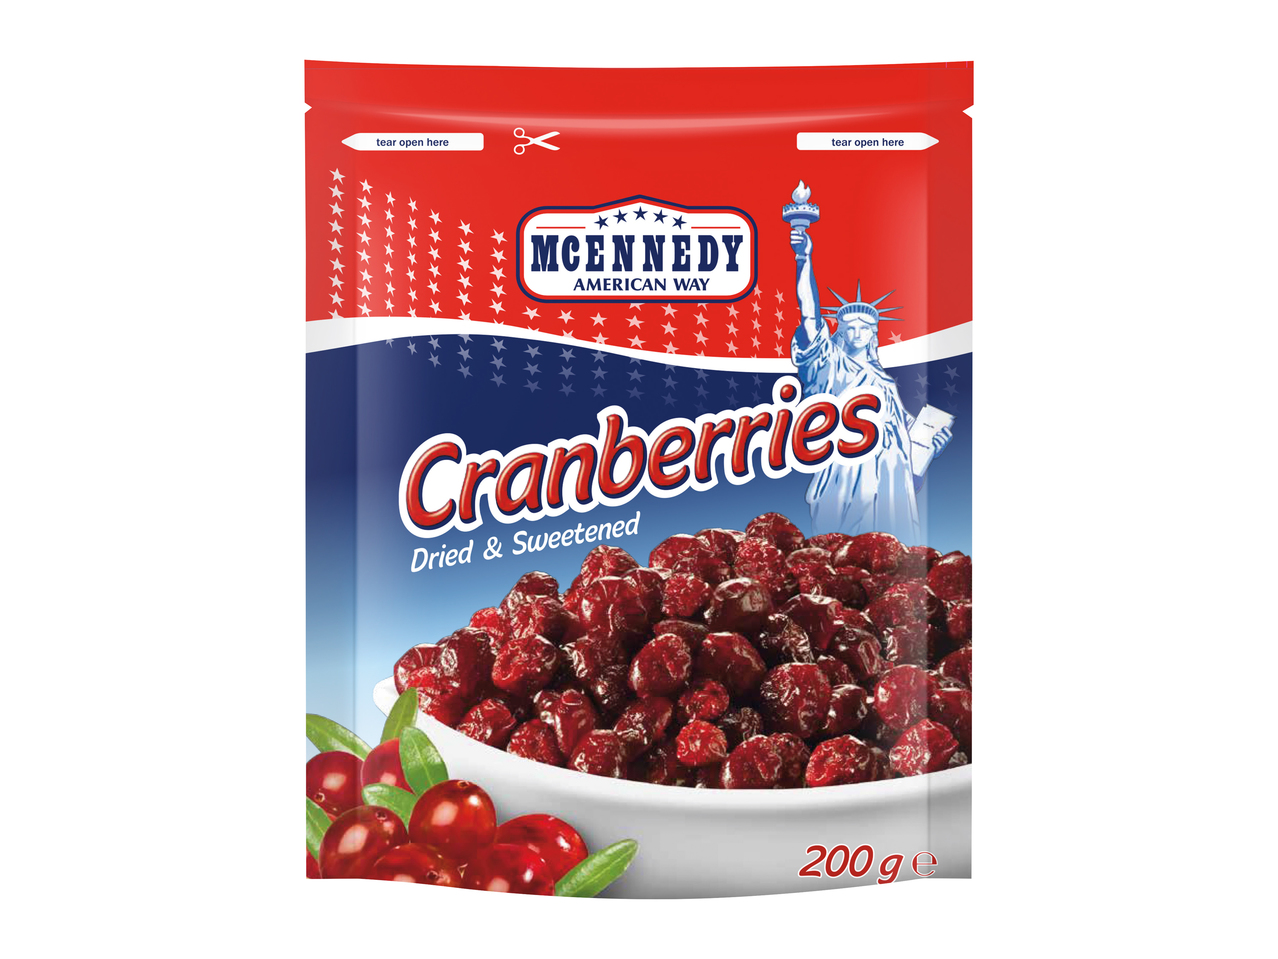 Canneberges